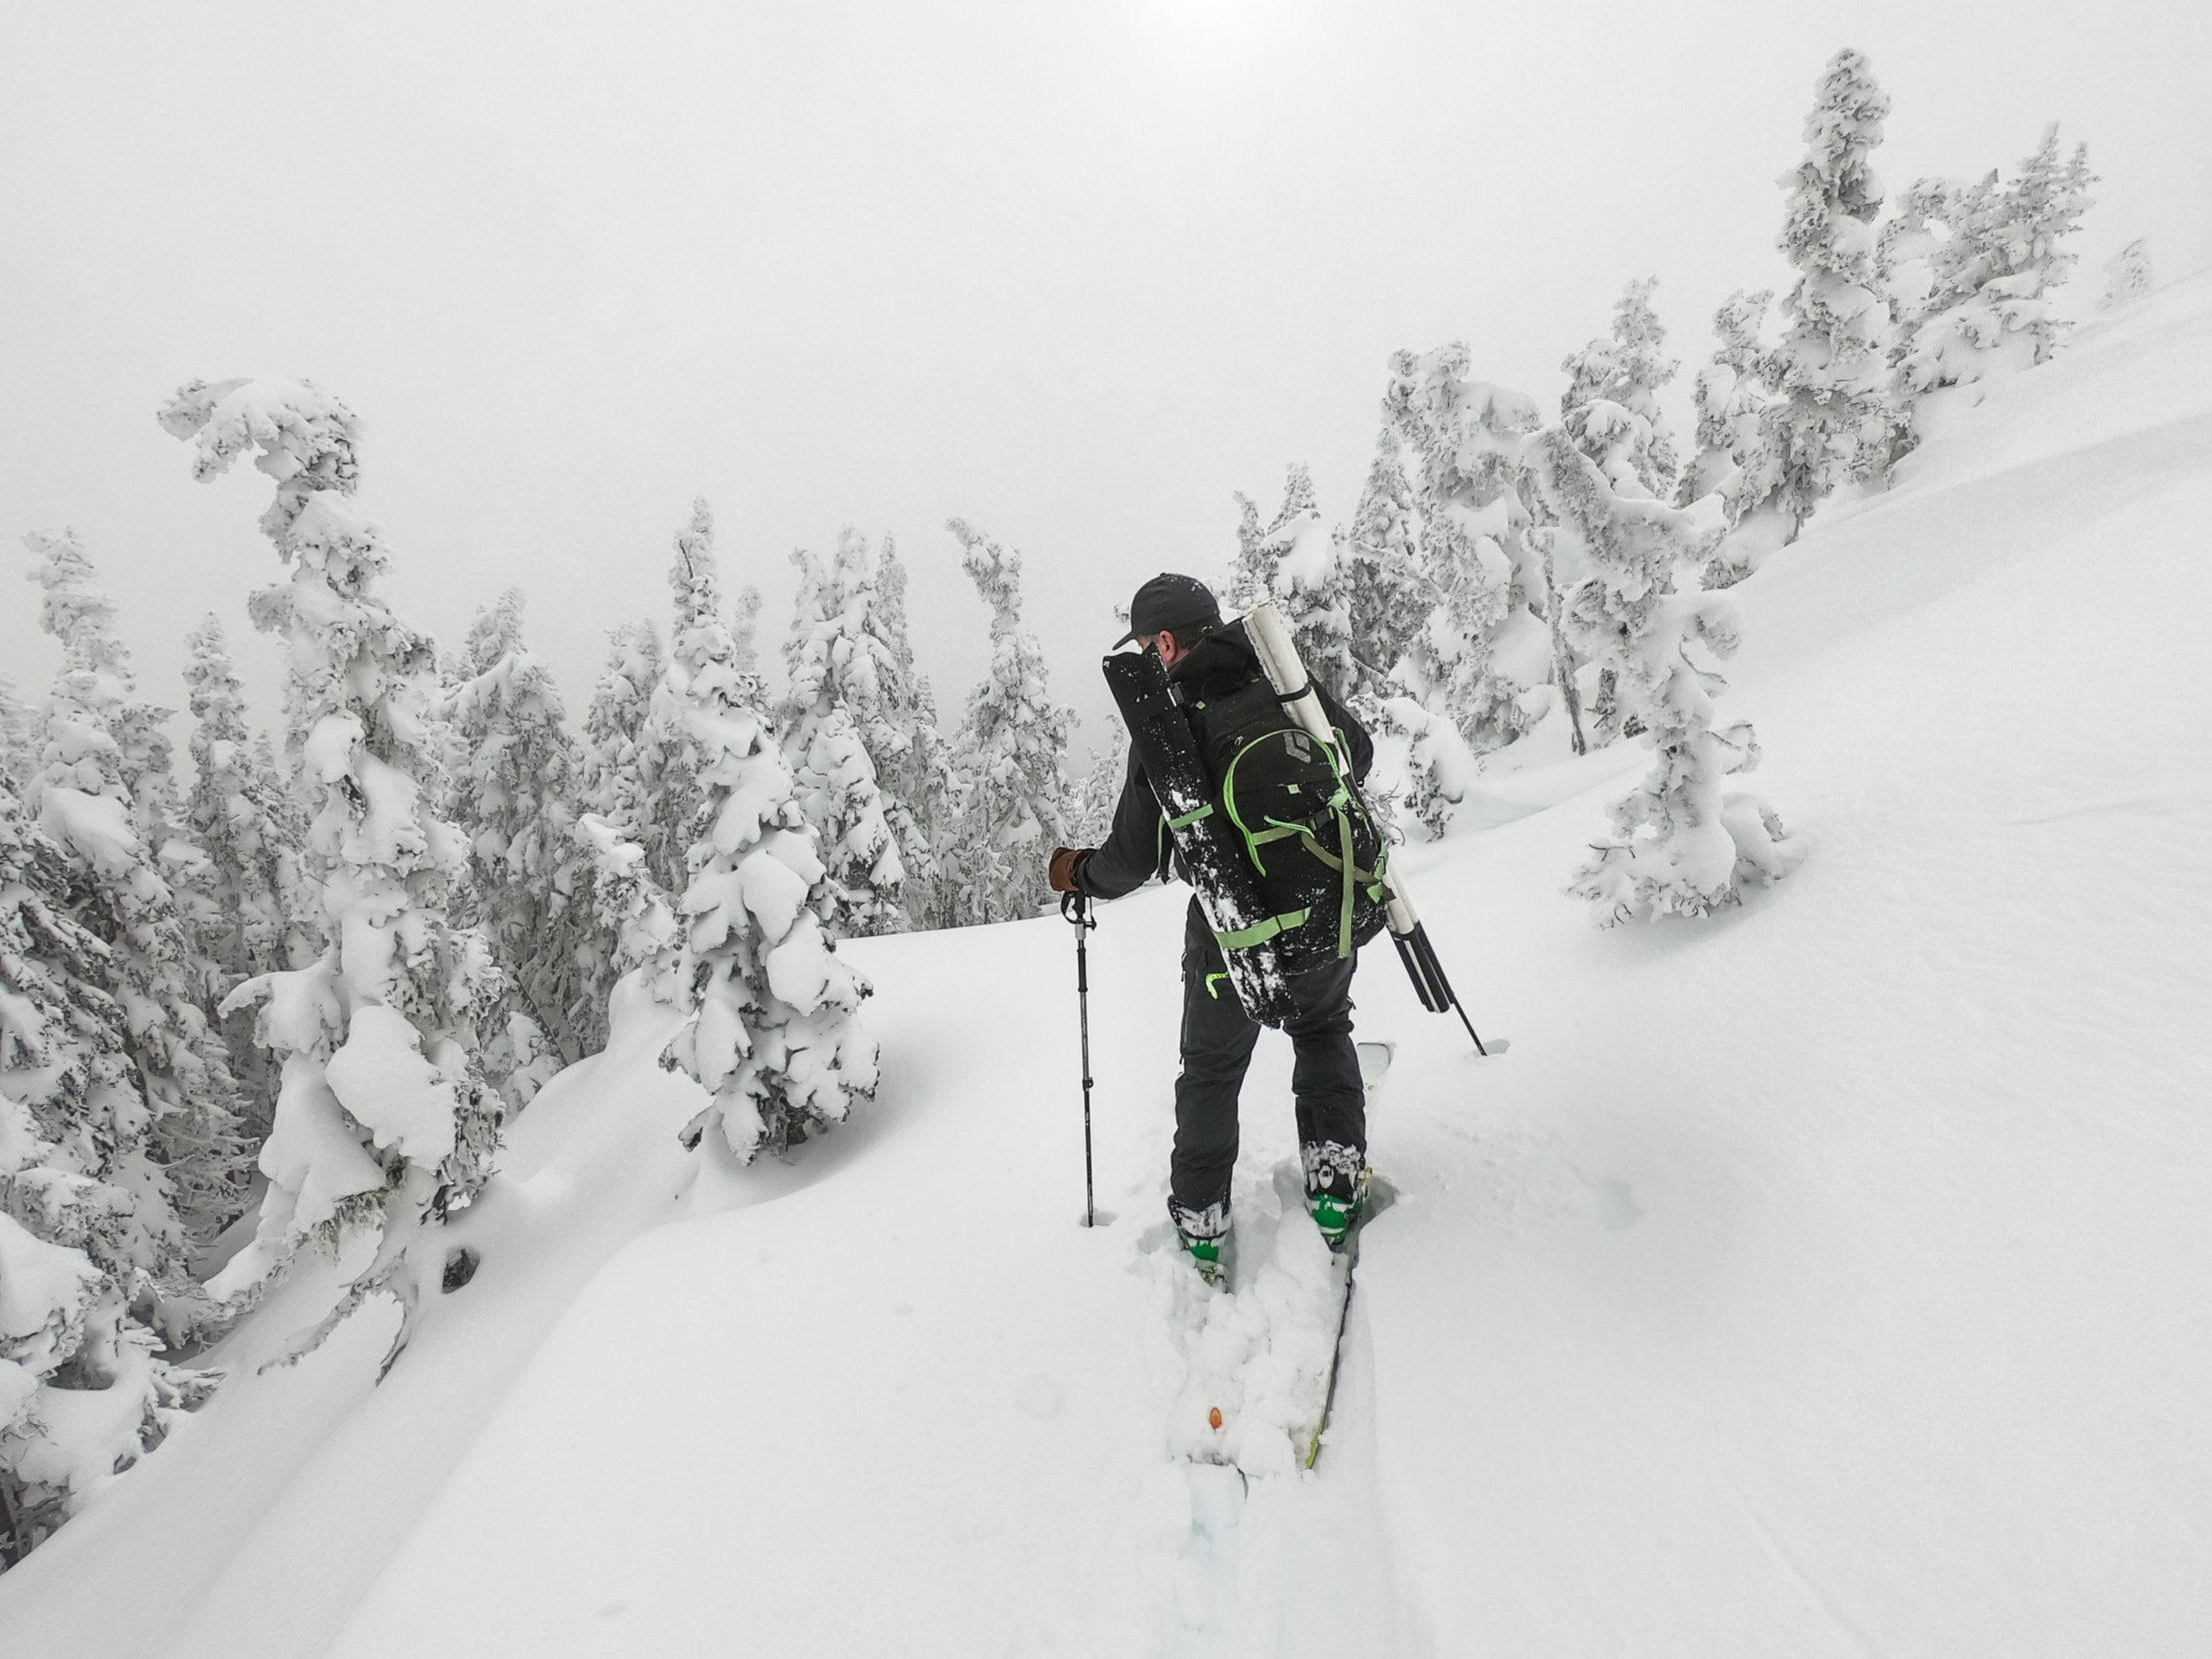 Loaded with gear to measure snowpack, research hydrologist Bill Floyd ventures into the British Columbia backcountry. Fieldwork is a perk of the job for this avid skier who otherwise spends his days in the lab or teaching geography at Vancouver Island University. Photo: Will McInnes.